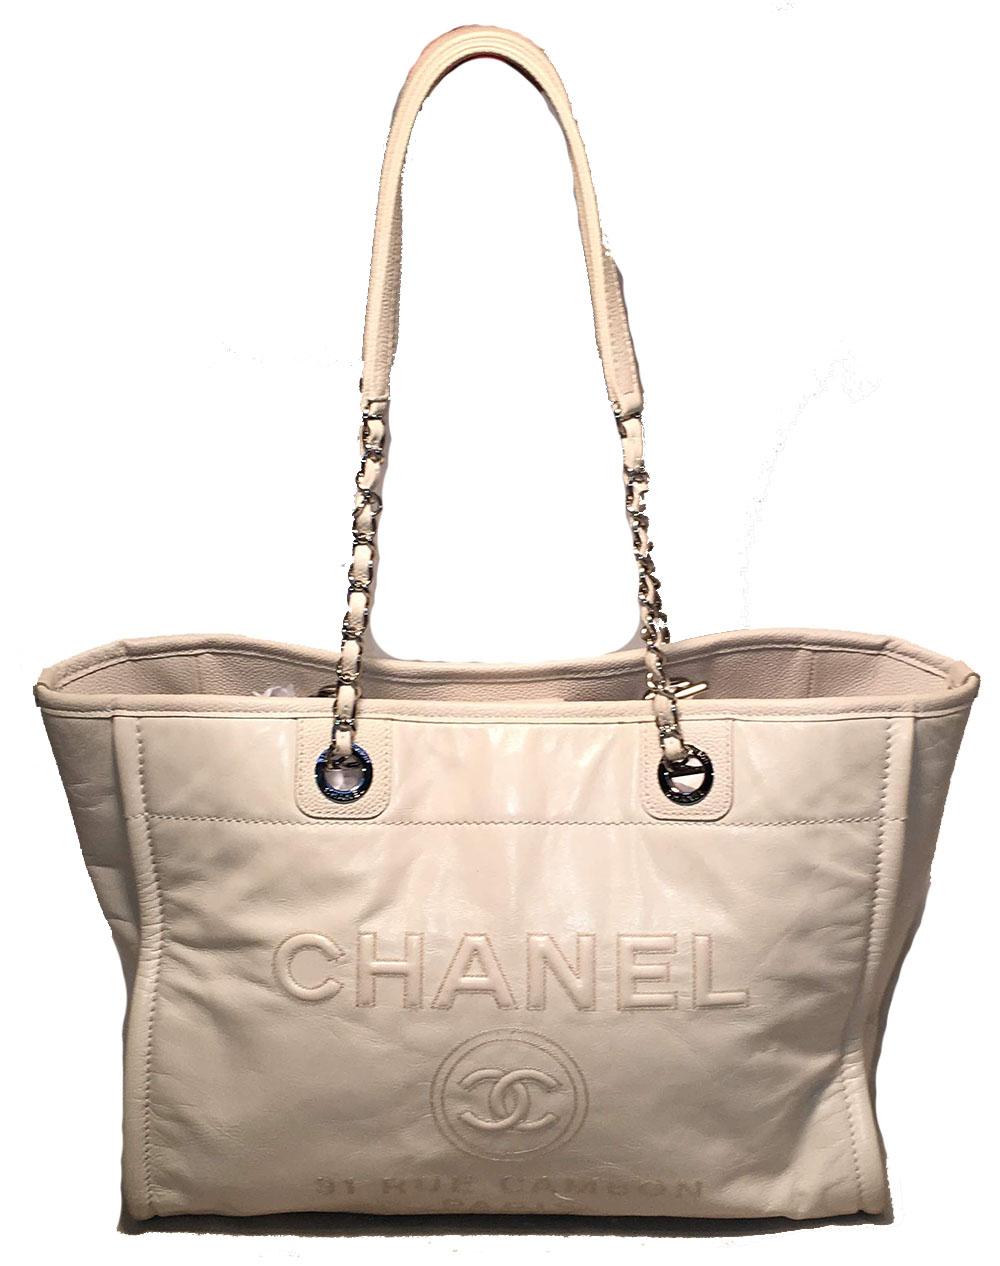 CLASSIC Chanel White Cream Leather Embroidered Rue Cambon Shoulder Bag Tote in very good condition. White leather exterior trimmed with silver hardware, caviar leather and woven chain and leather shoulder straps. Embroidered CC logo with rue cambon